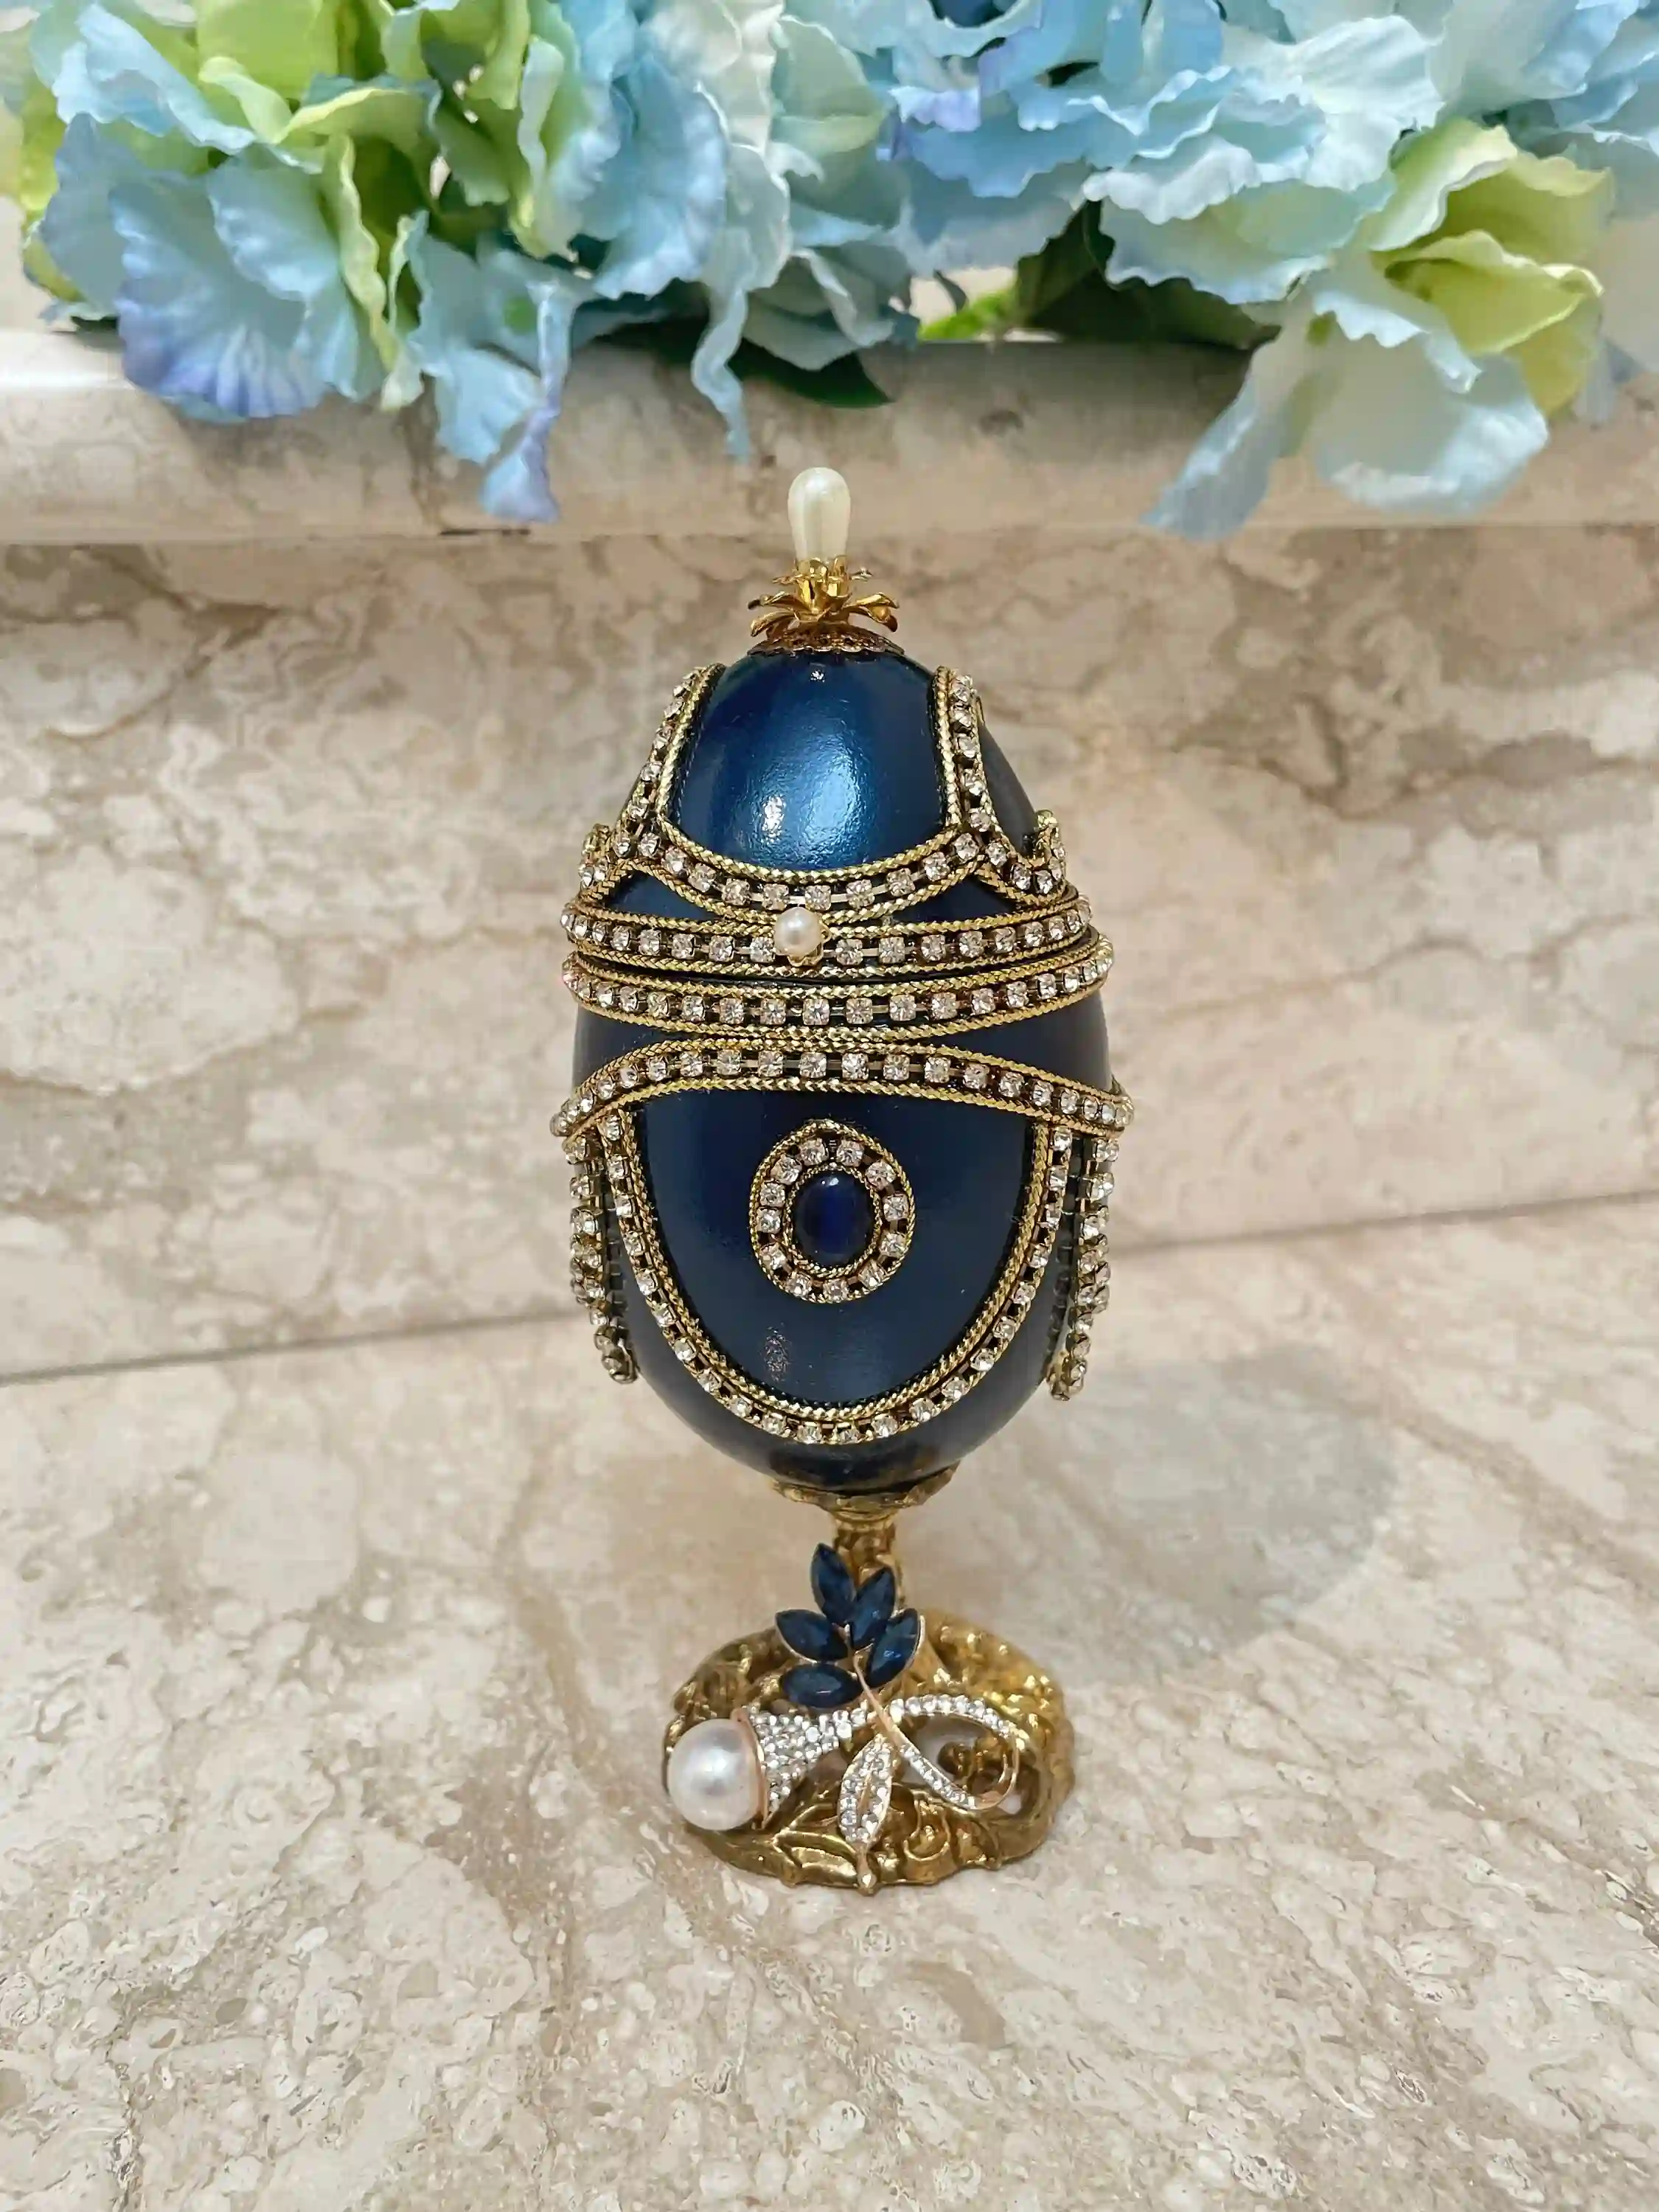 2002 - Faberge egg style ONE ofa KIND Imperial Faberge Egg Ornament Faberge Egg Easter Egg Imperial Collection Musical Faberge egg Birthday 